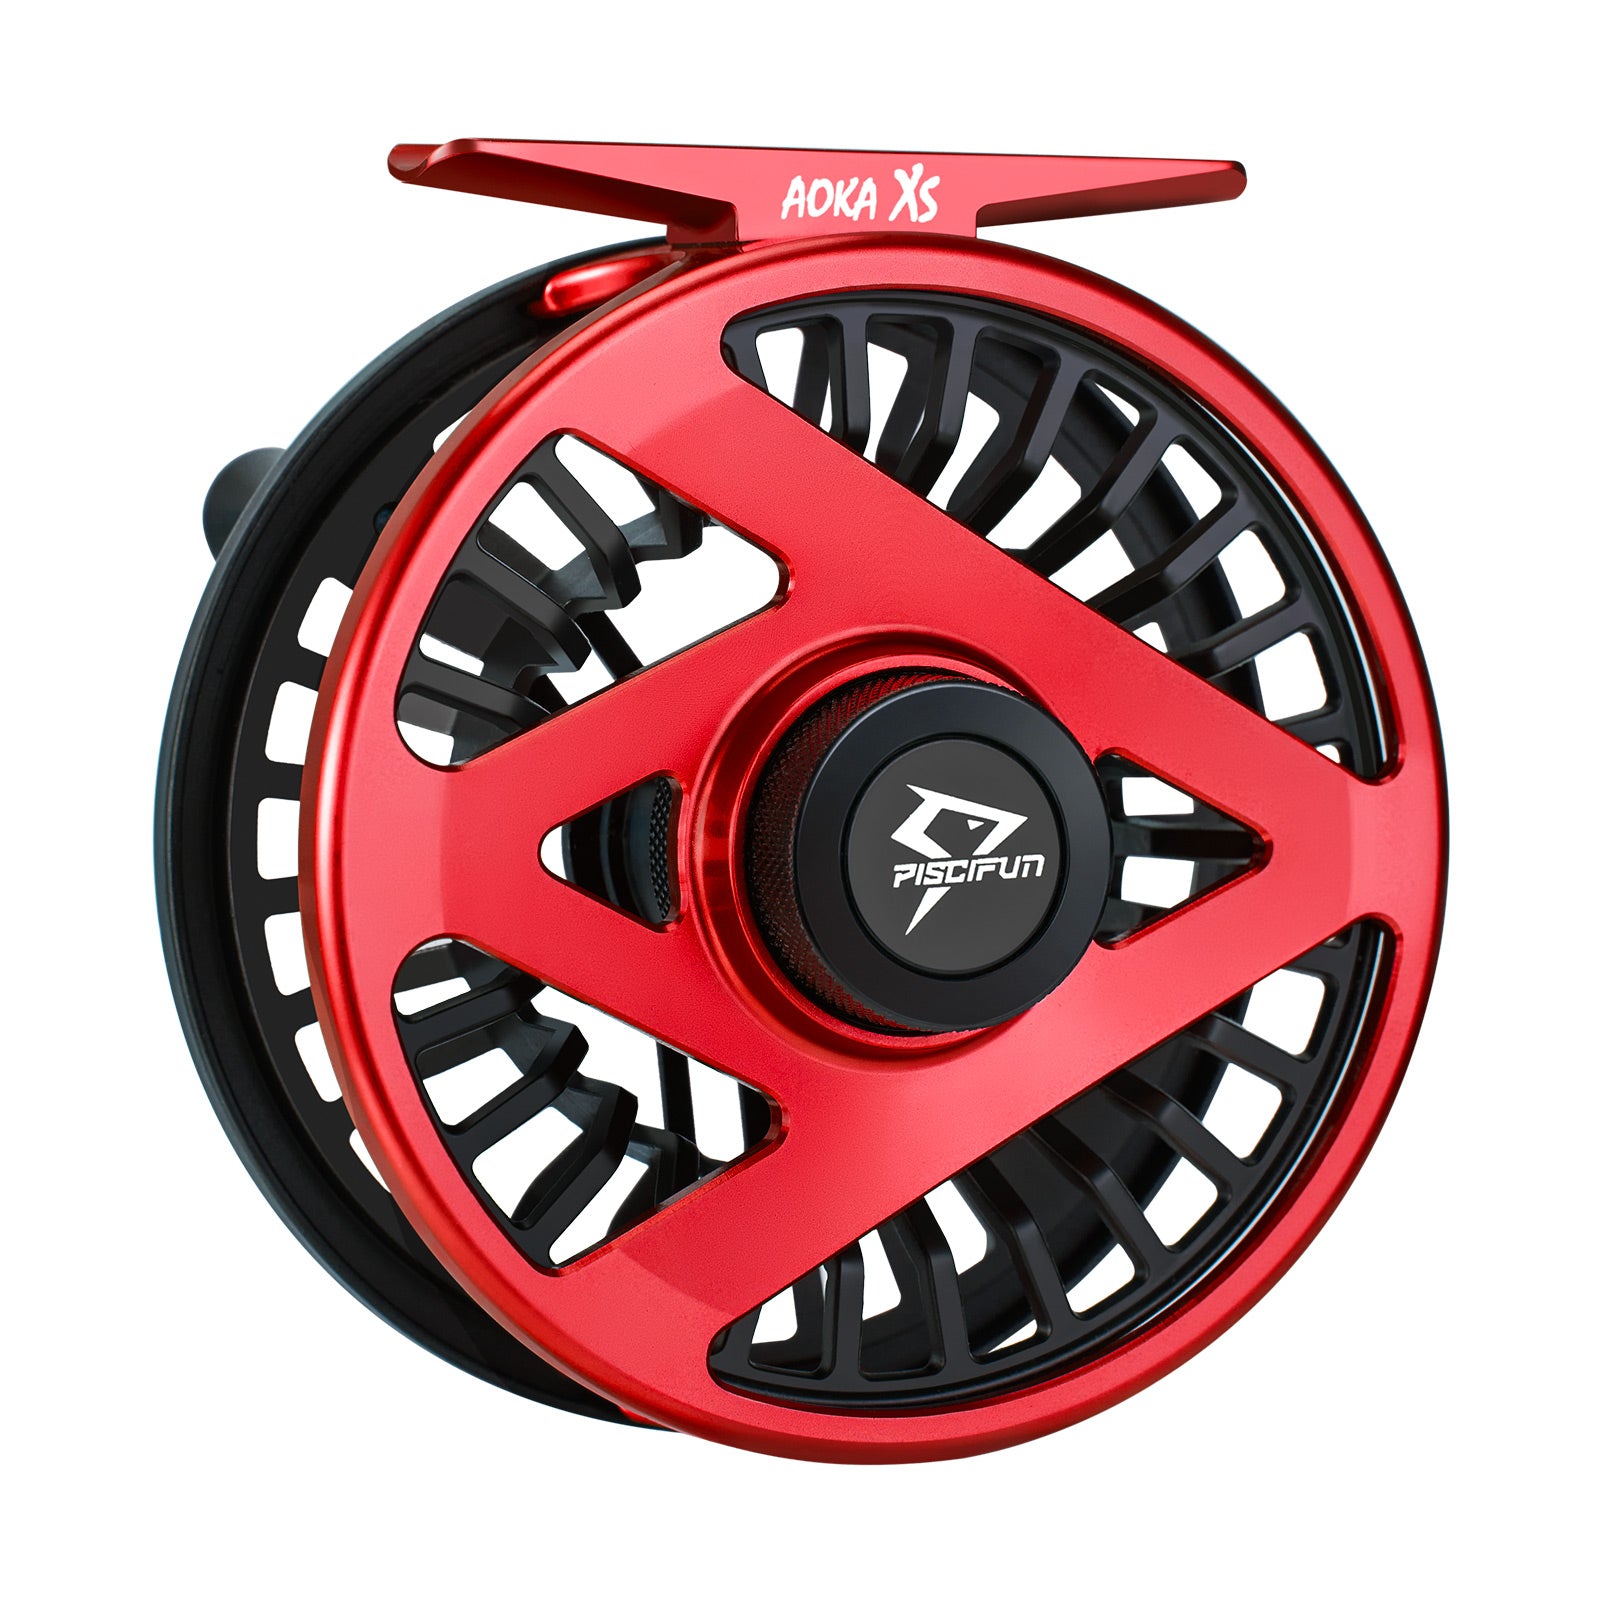 Piscifun® Aoka XS Fly Fishing Reel with Sealed Drag Sale